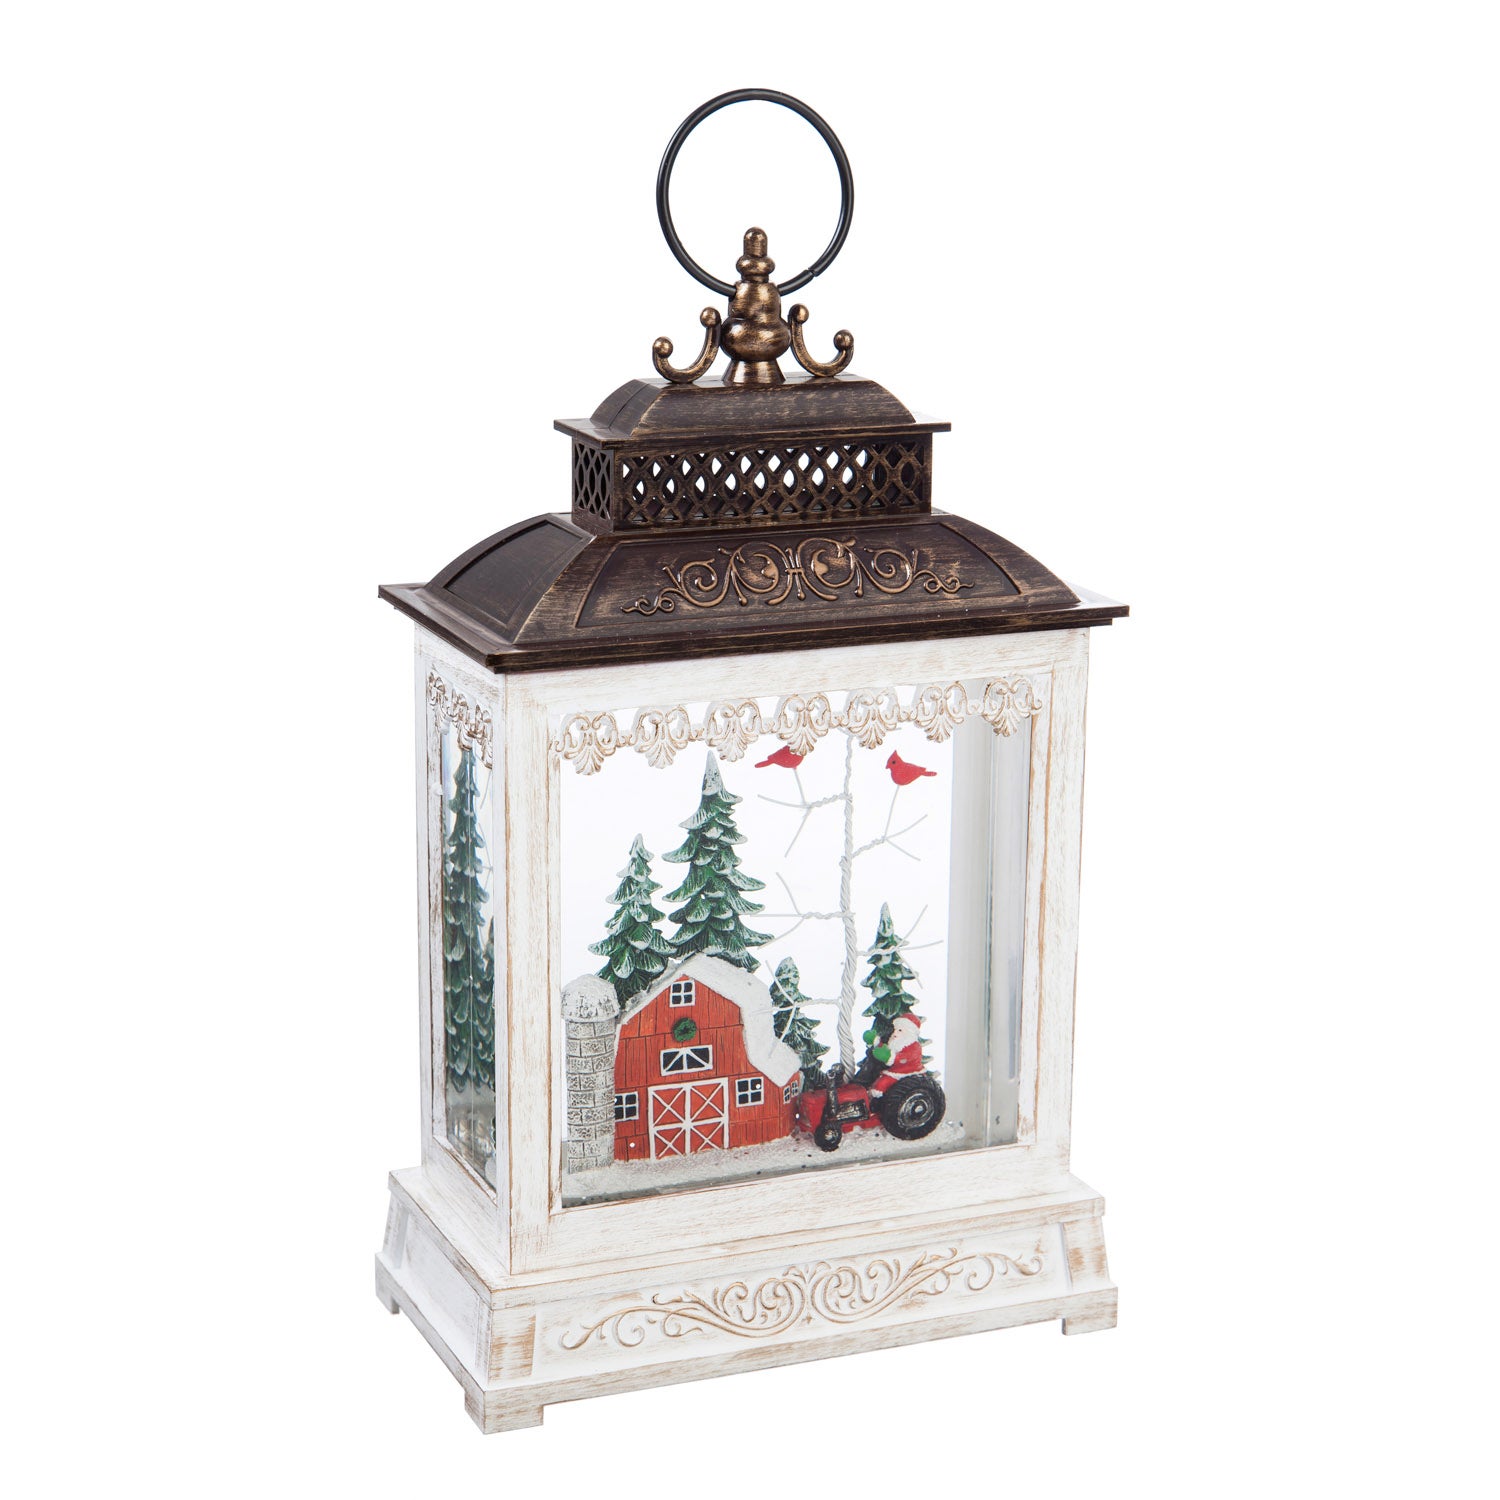 11'' Tall LED Musical Lantern with Spinning Action and Timer Function Table Decor, Winter Barn